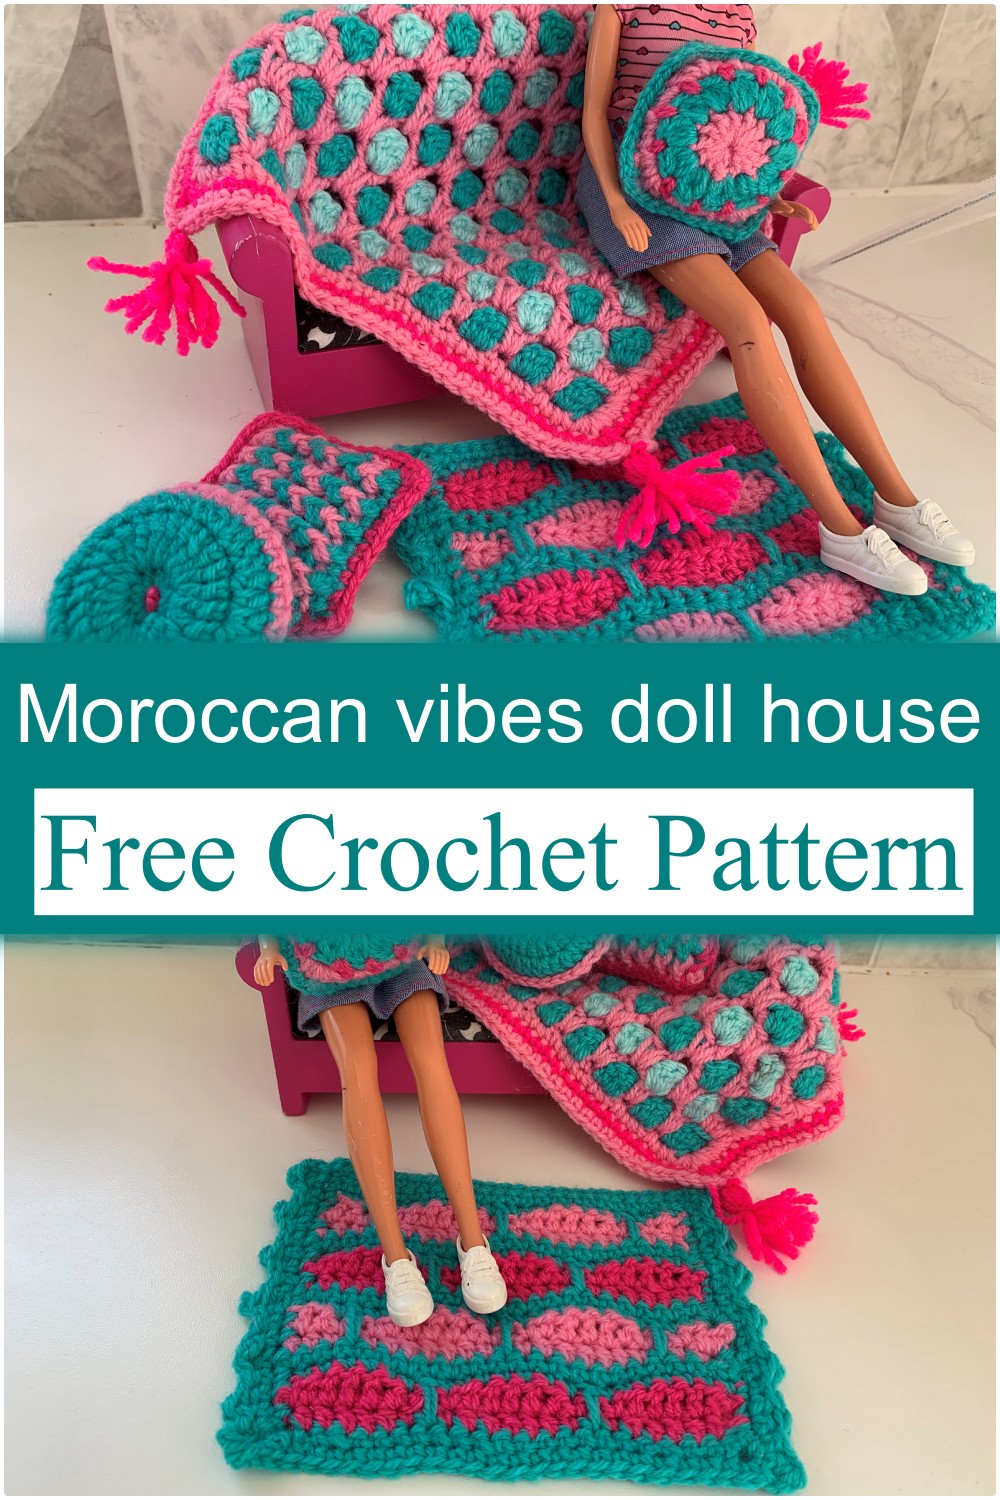 Moroccan vibes doll house